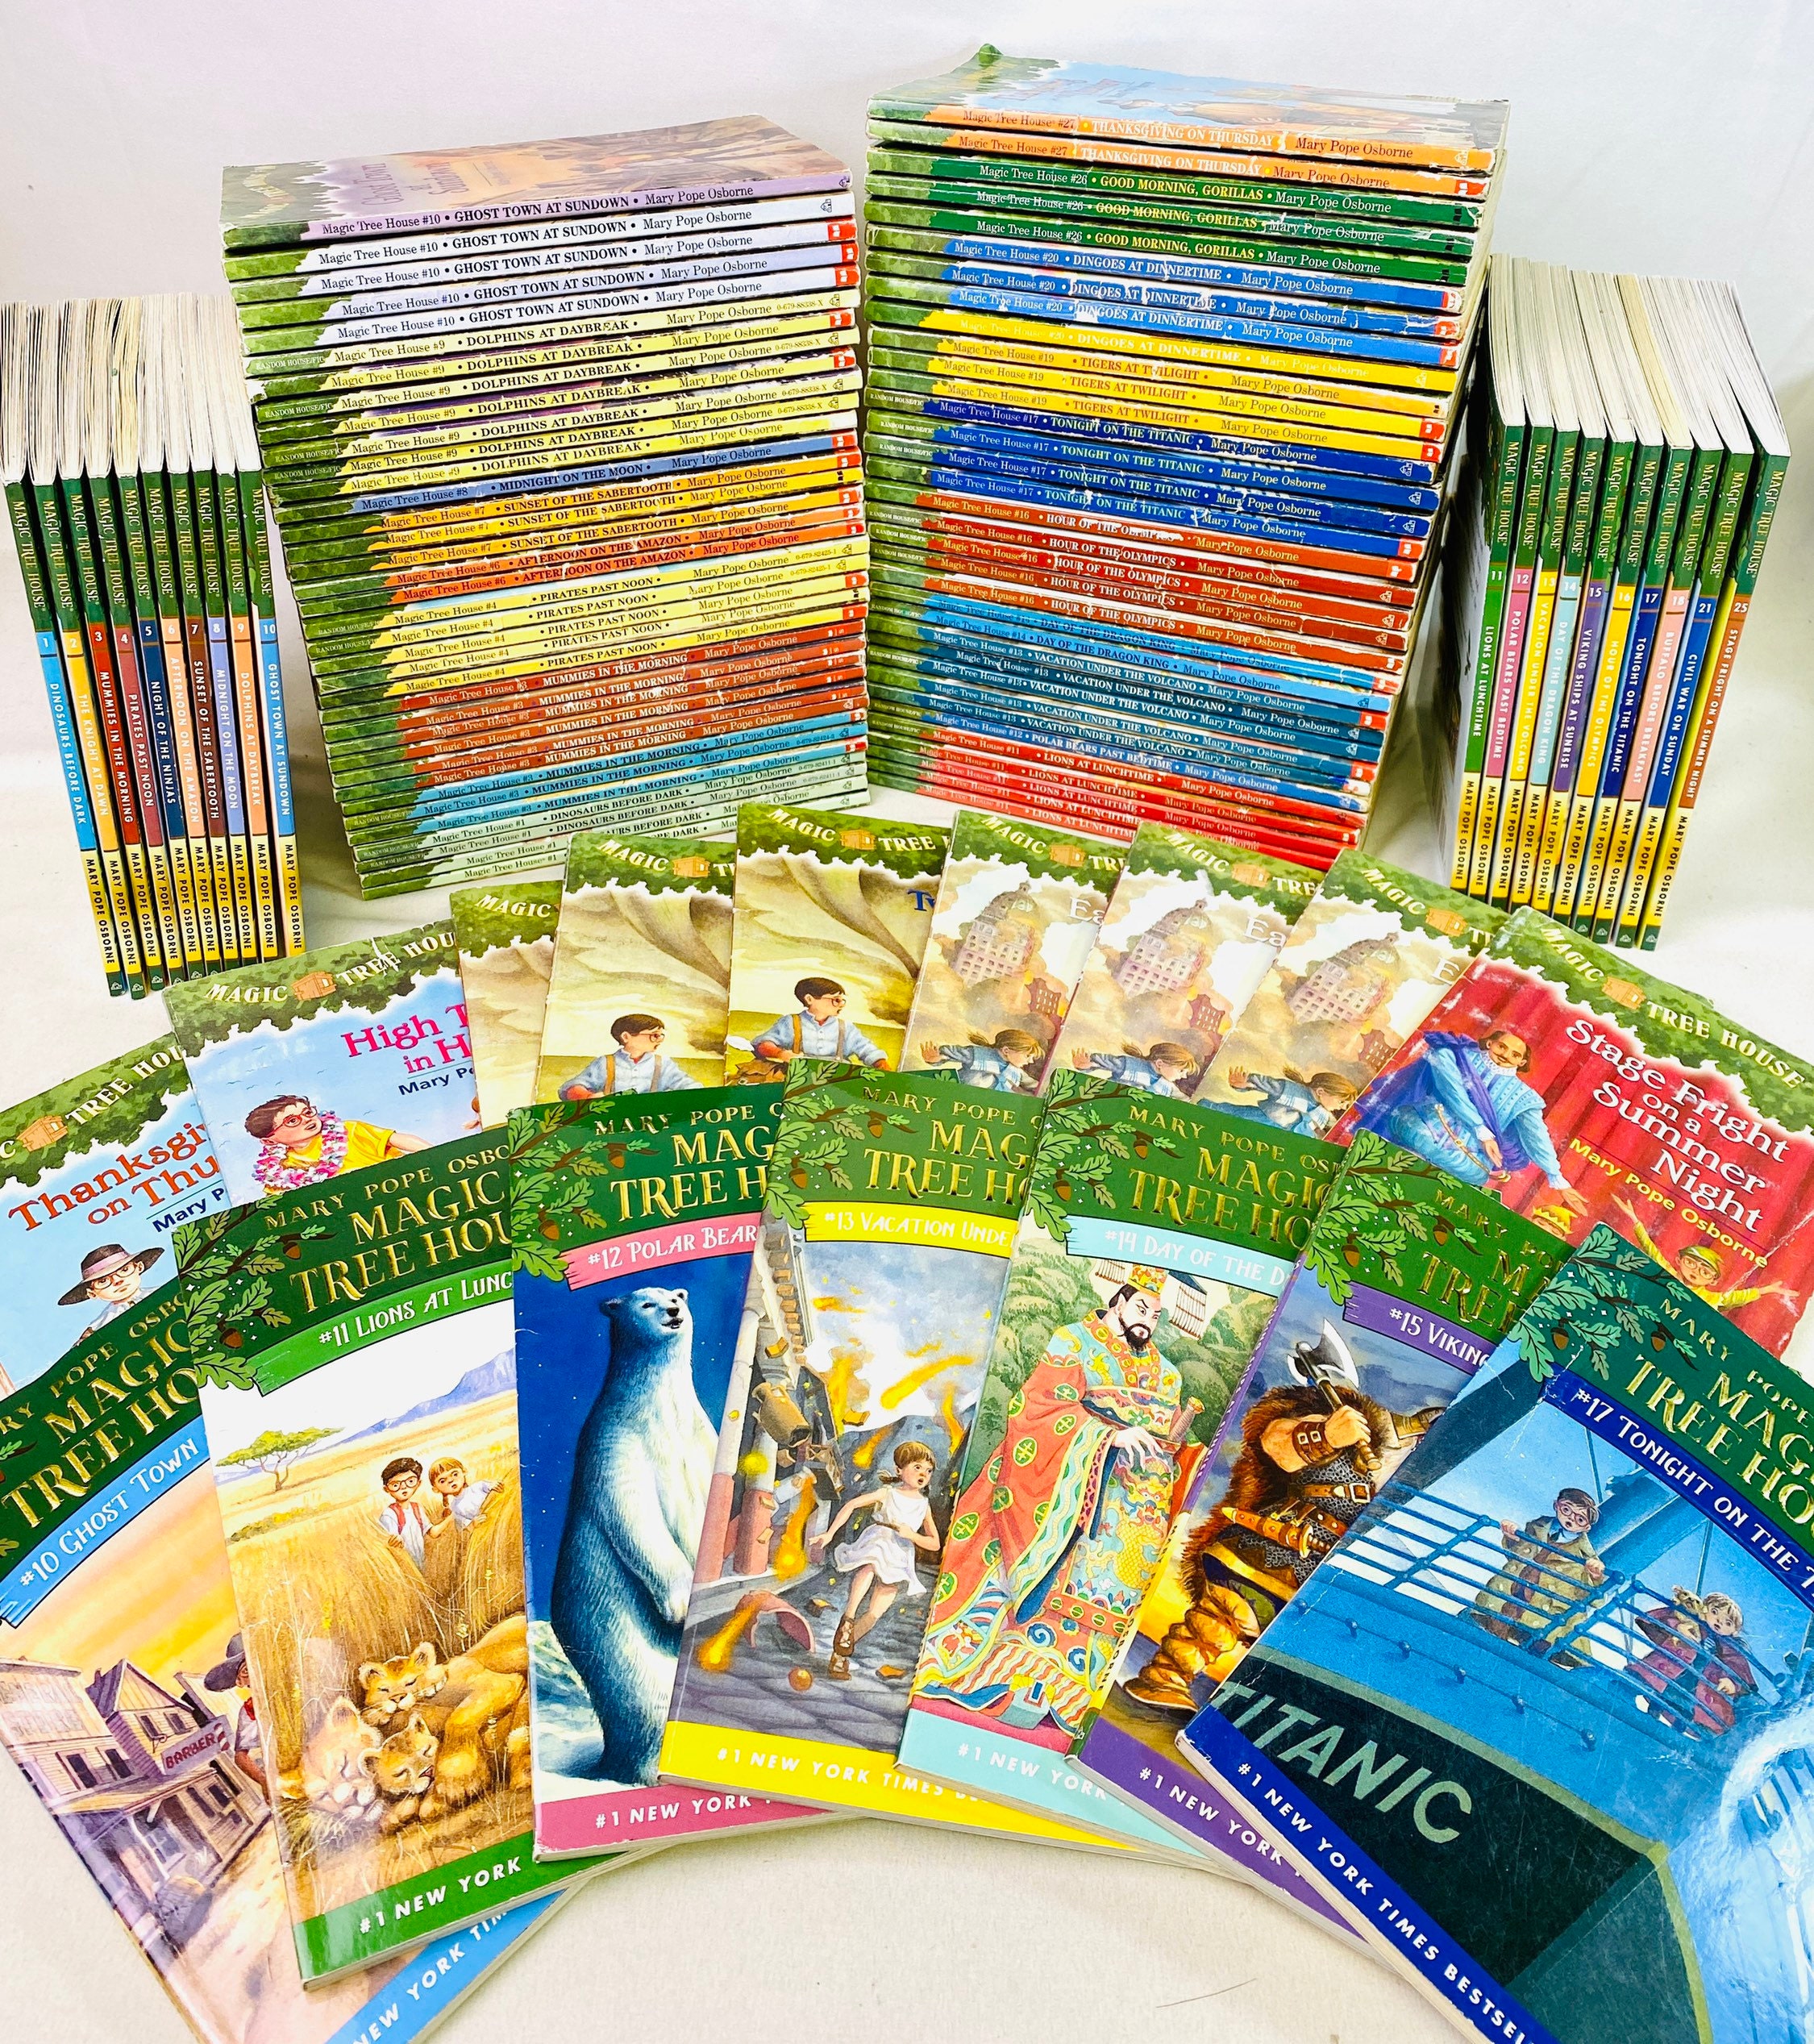 Magic tree house for sale  